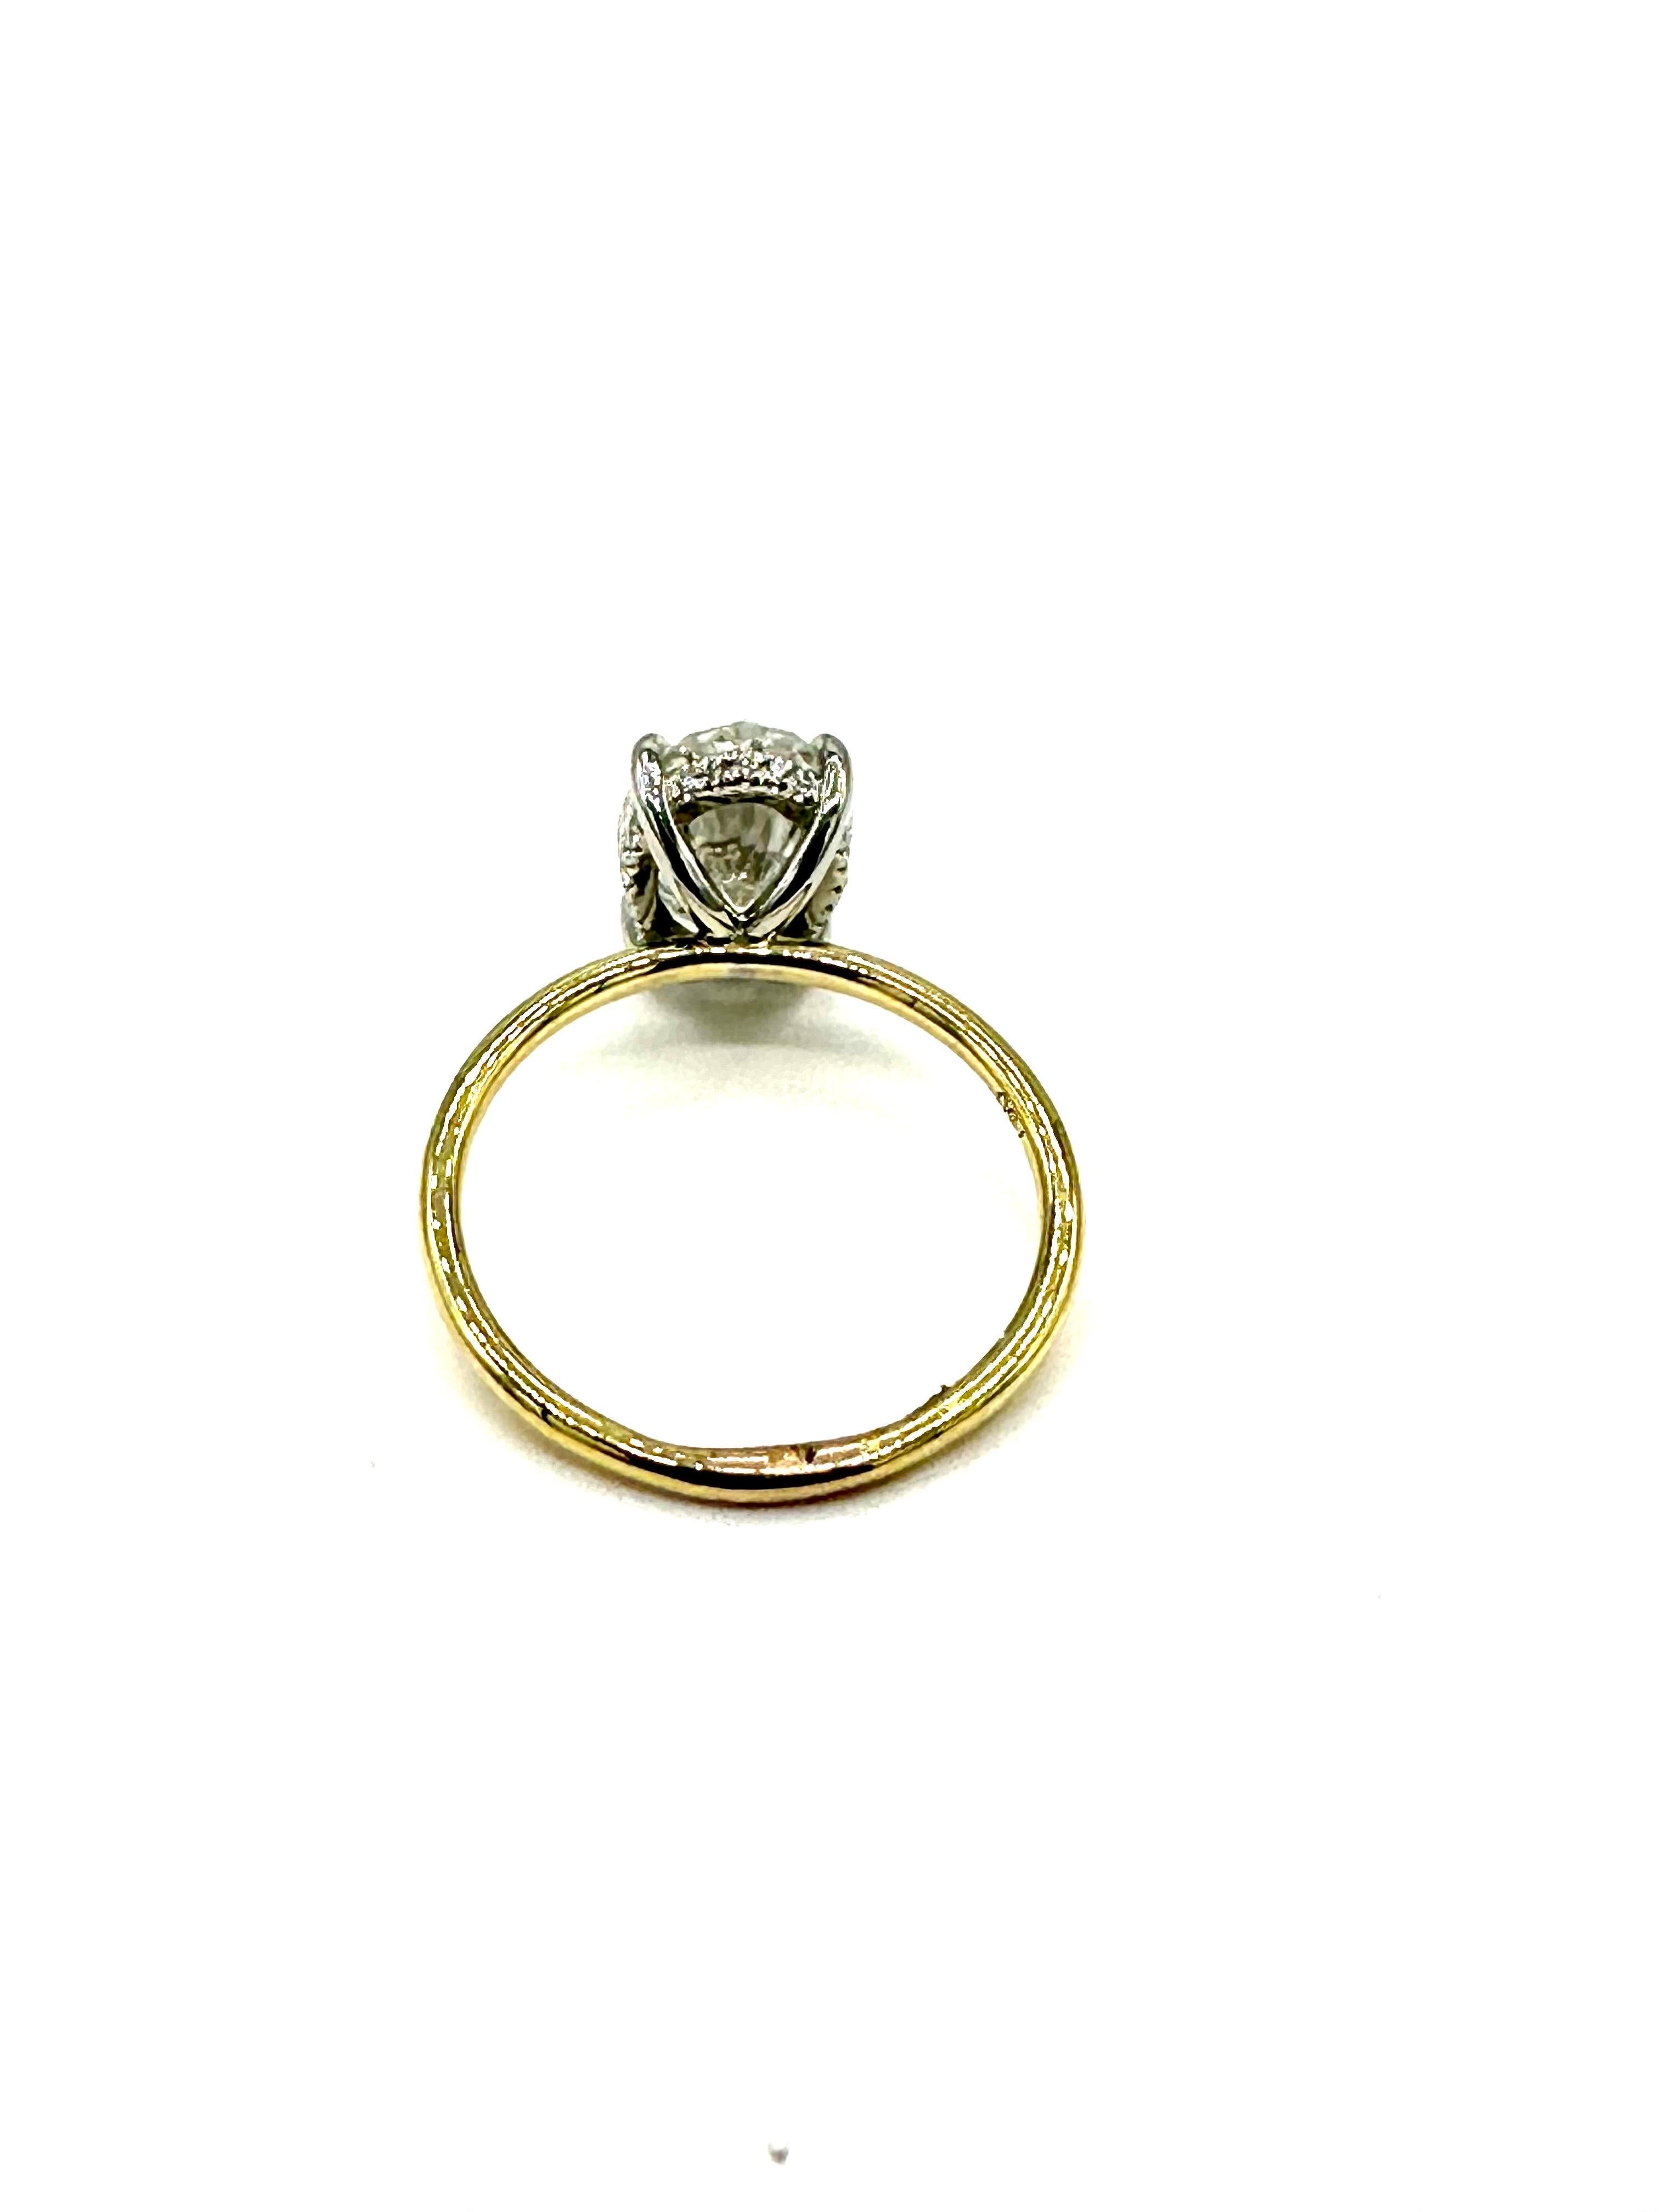 2.51 Carat Oval Brilliant Diamond and 18K Yellow Gold Engagement Ring  In Excellent Condition For Sale In Chevy Chase, MD